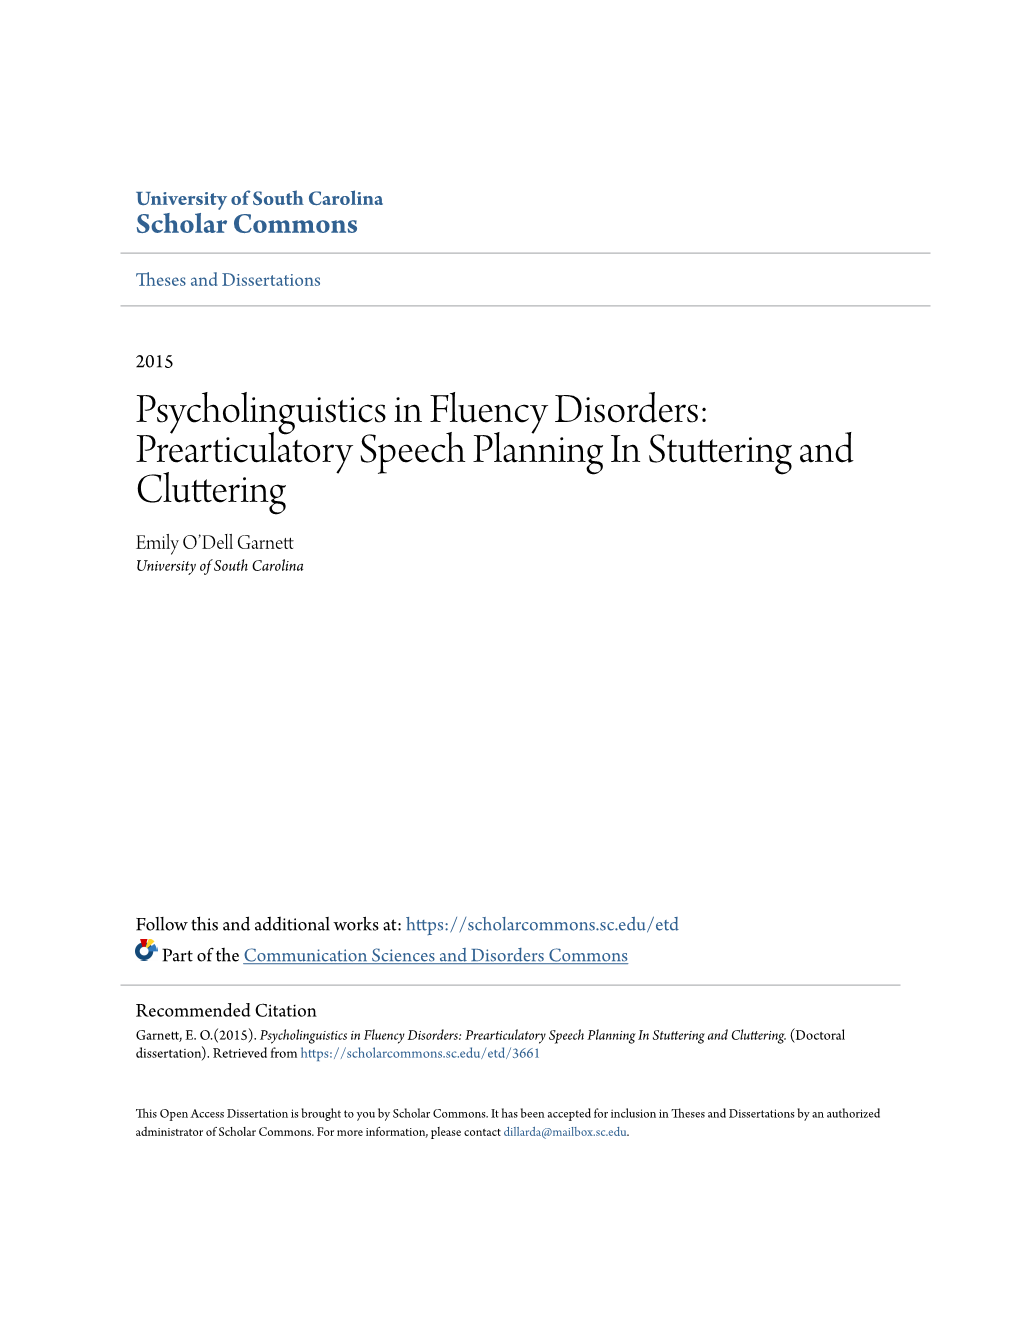 Psycholinguistics in Fluency Disorders: Prearticulatory Speech Planning in Stuttering and Cluttering Emily O’Dell Garnett University of South Carolina